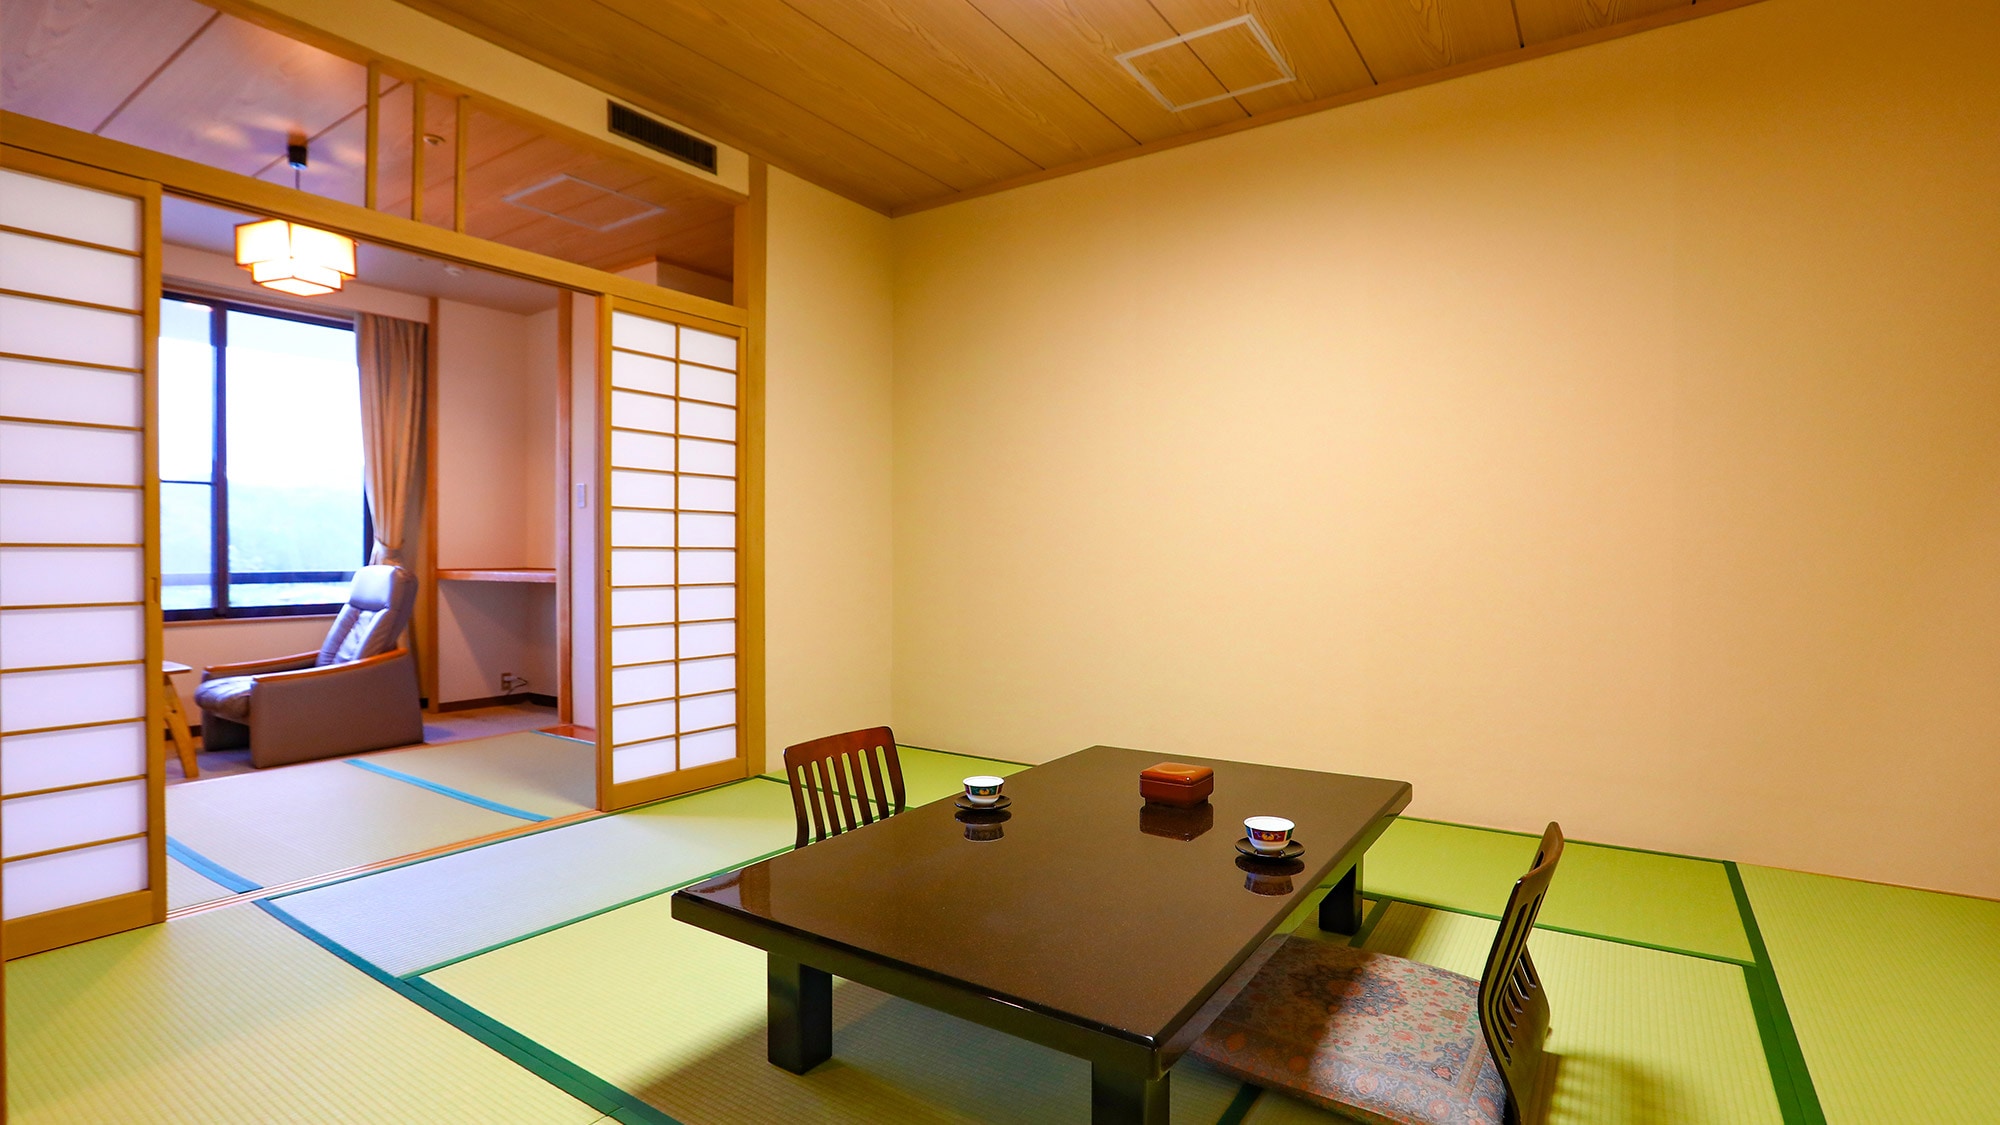 [Non-smoking] Japanese-style room 10 tatami mats + 3 tatami mats (example) & hellip; A spacious Japanese-style room with a comfortable Japanese atmosphere.